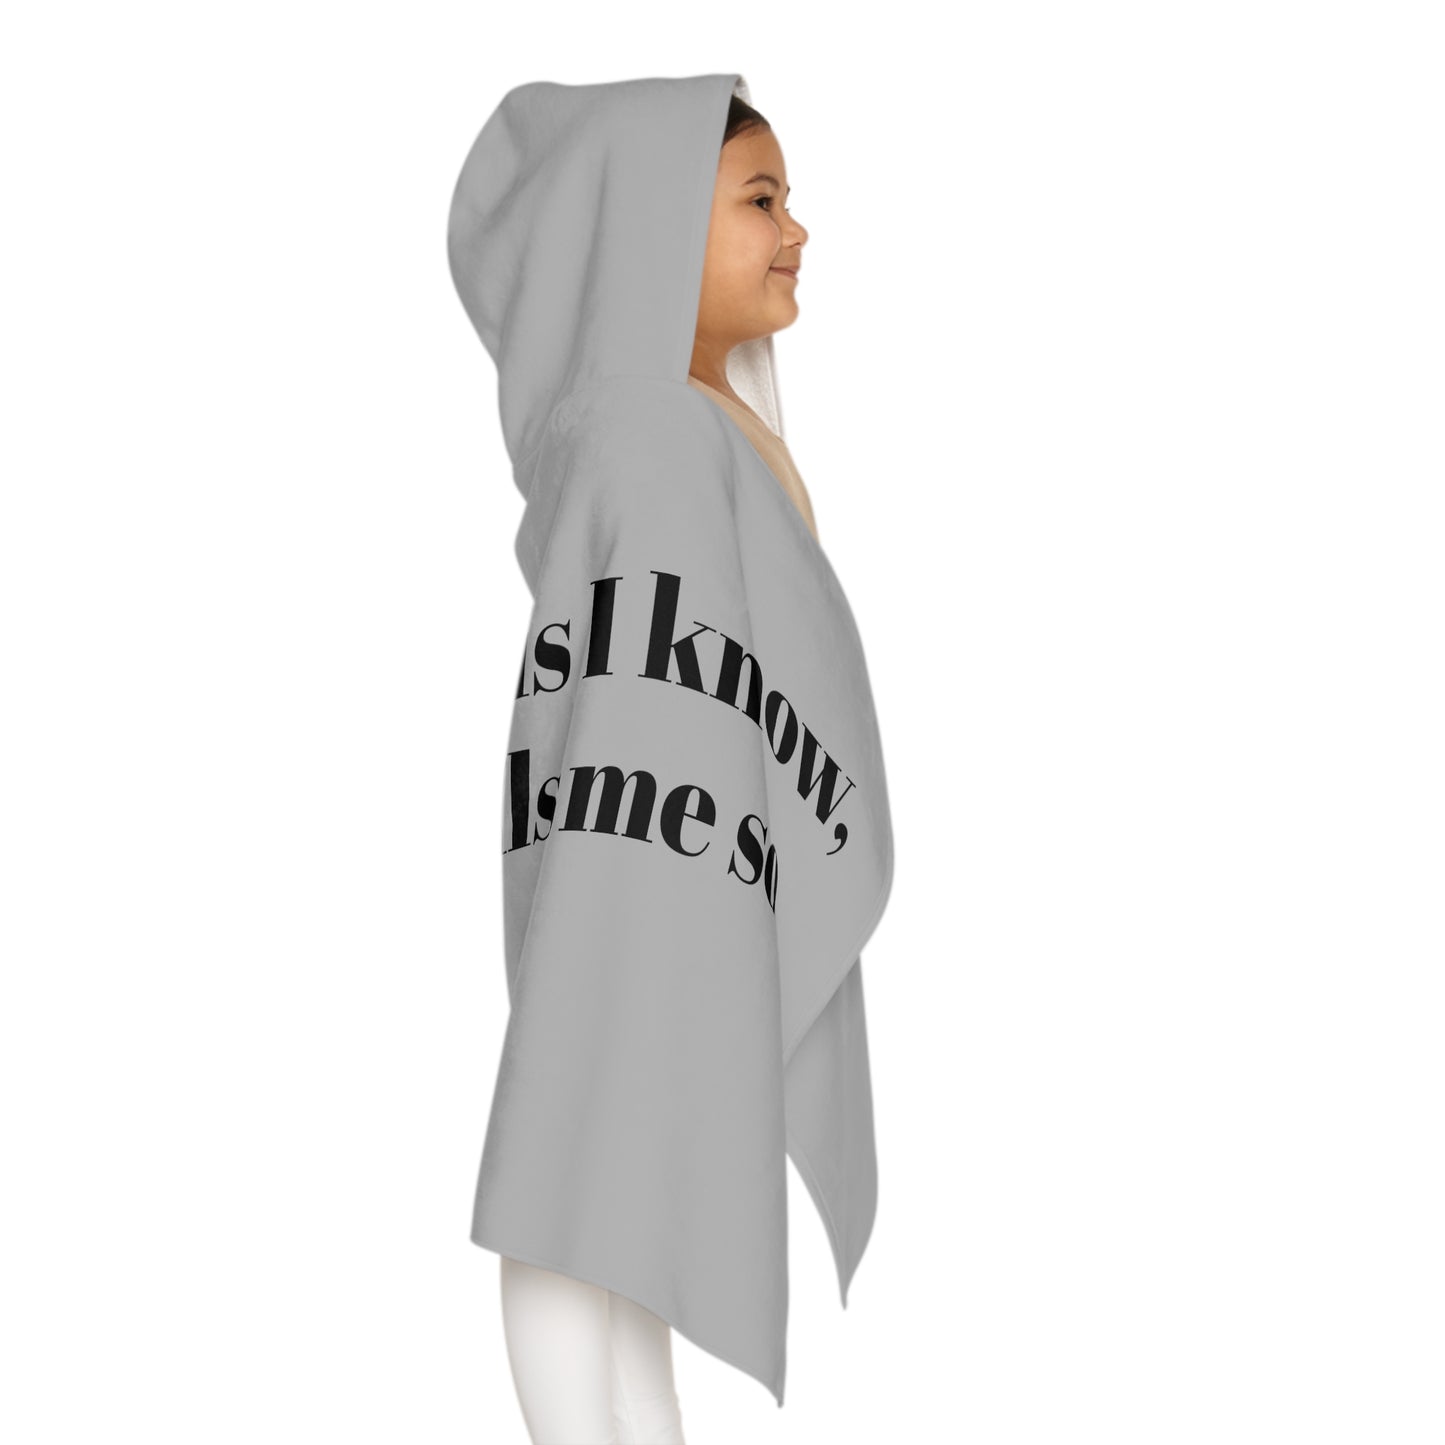 Jesus Loves Me This I know Youth Hooded Towel